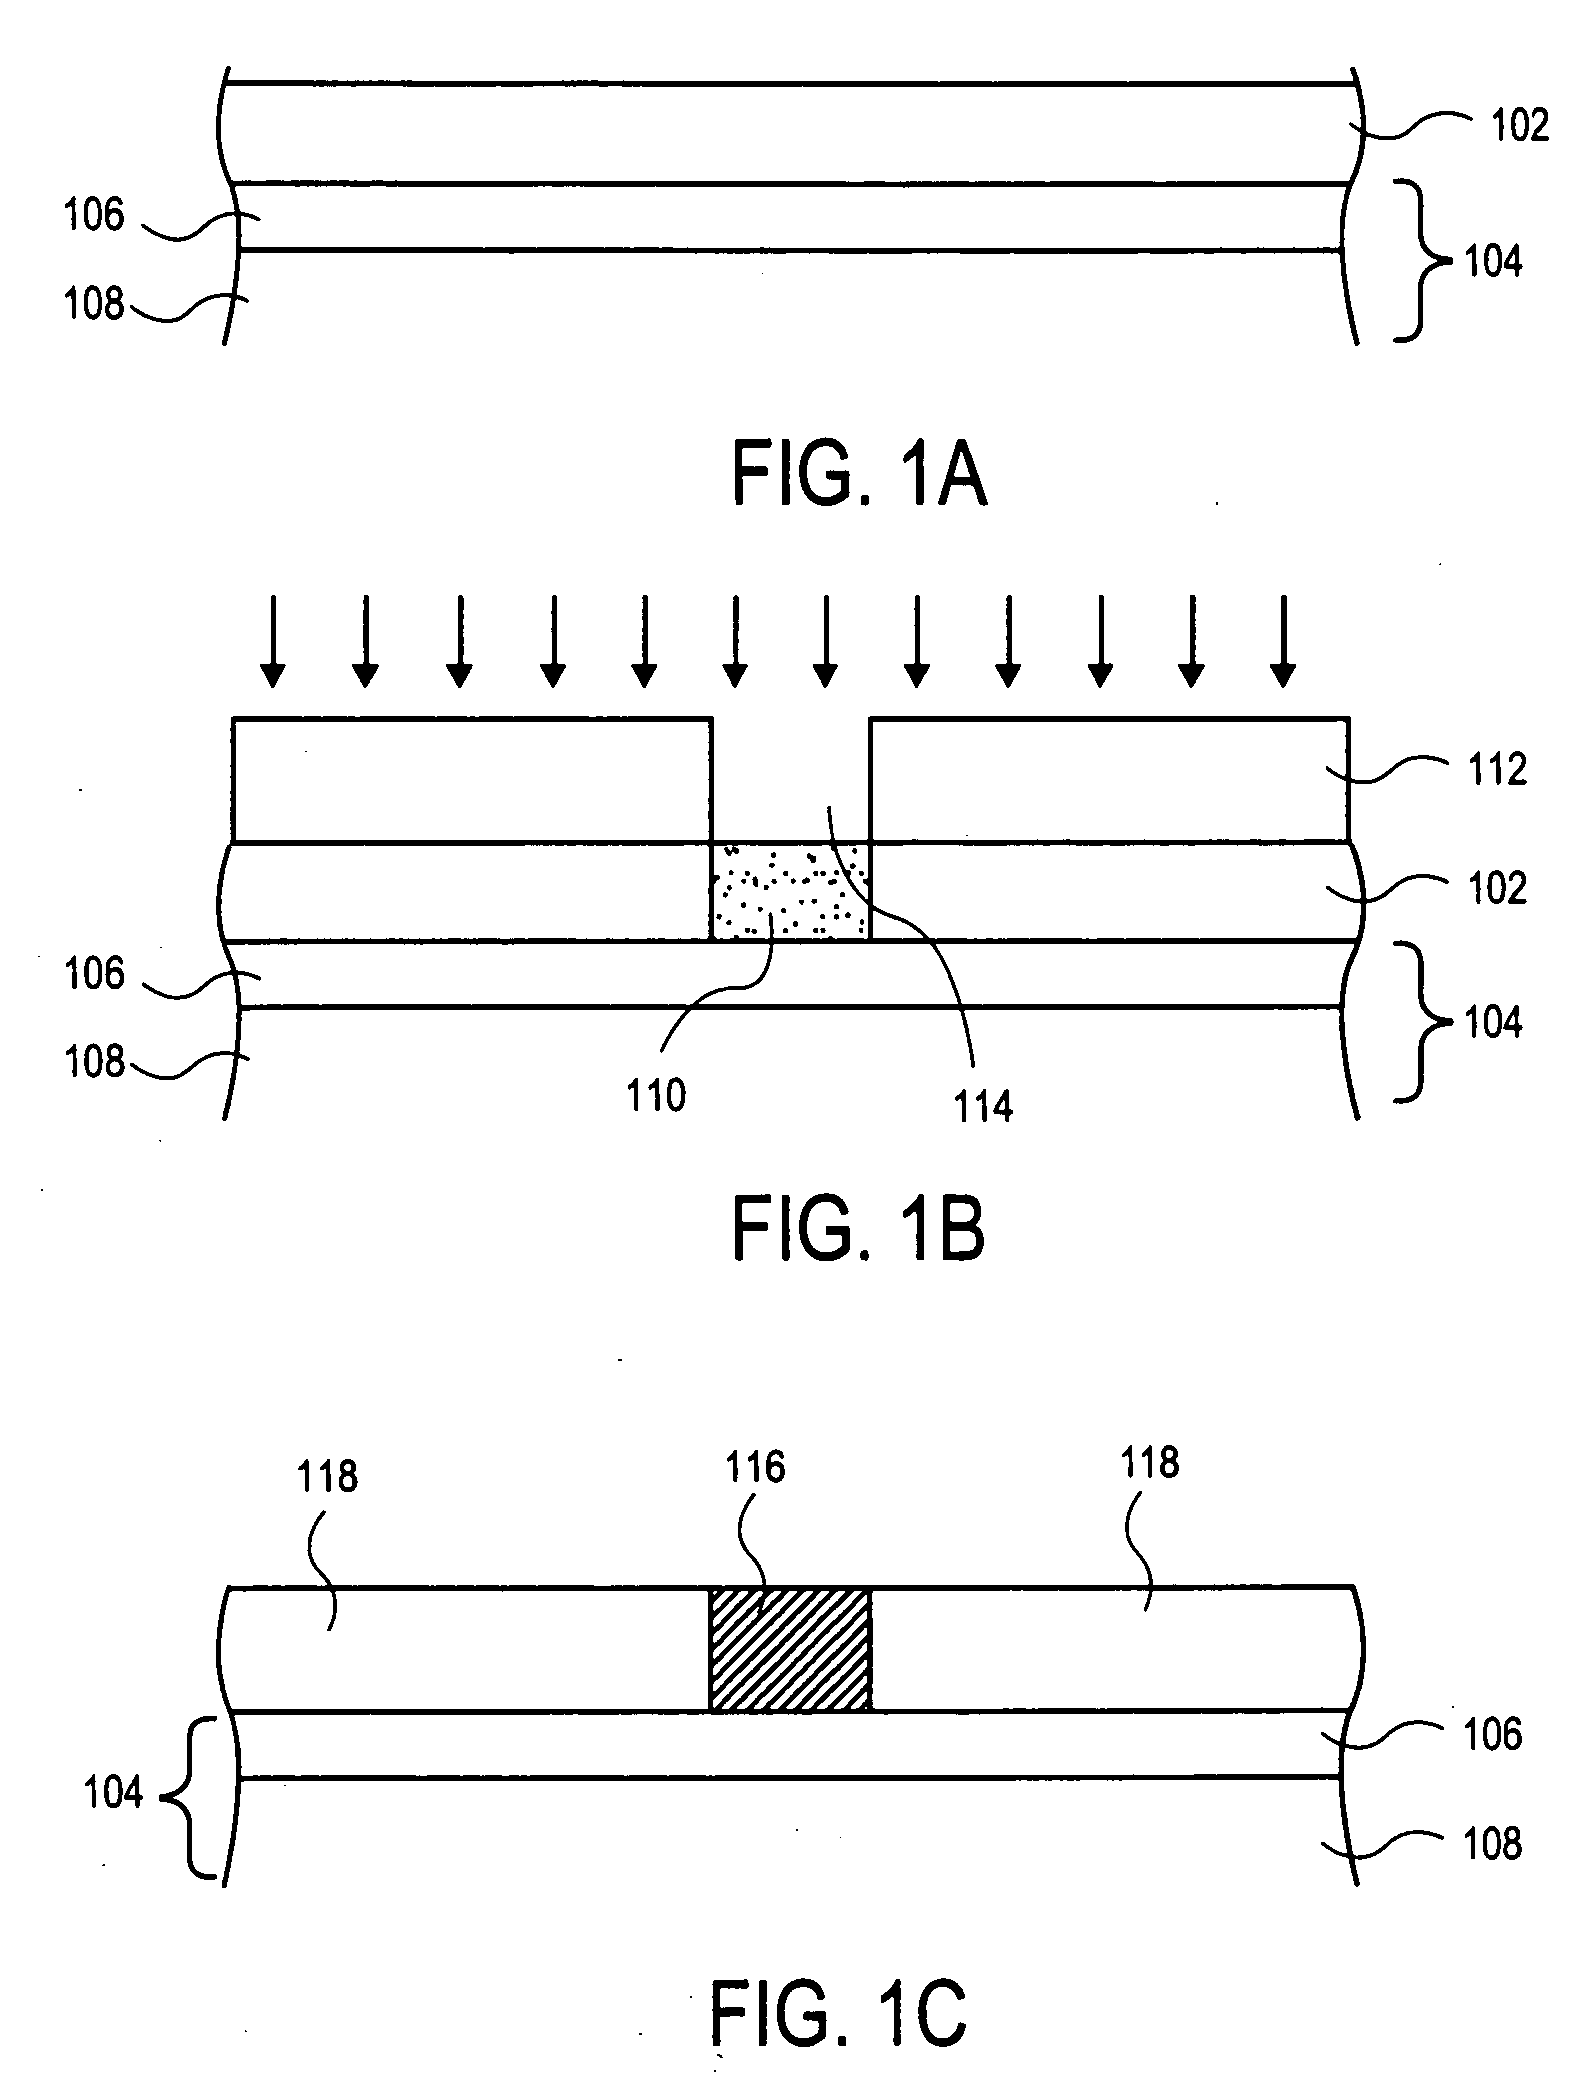 Method of varying etch selectivities of a film